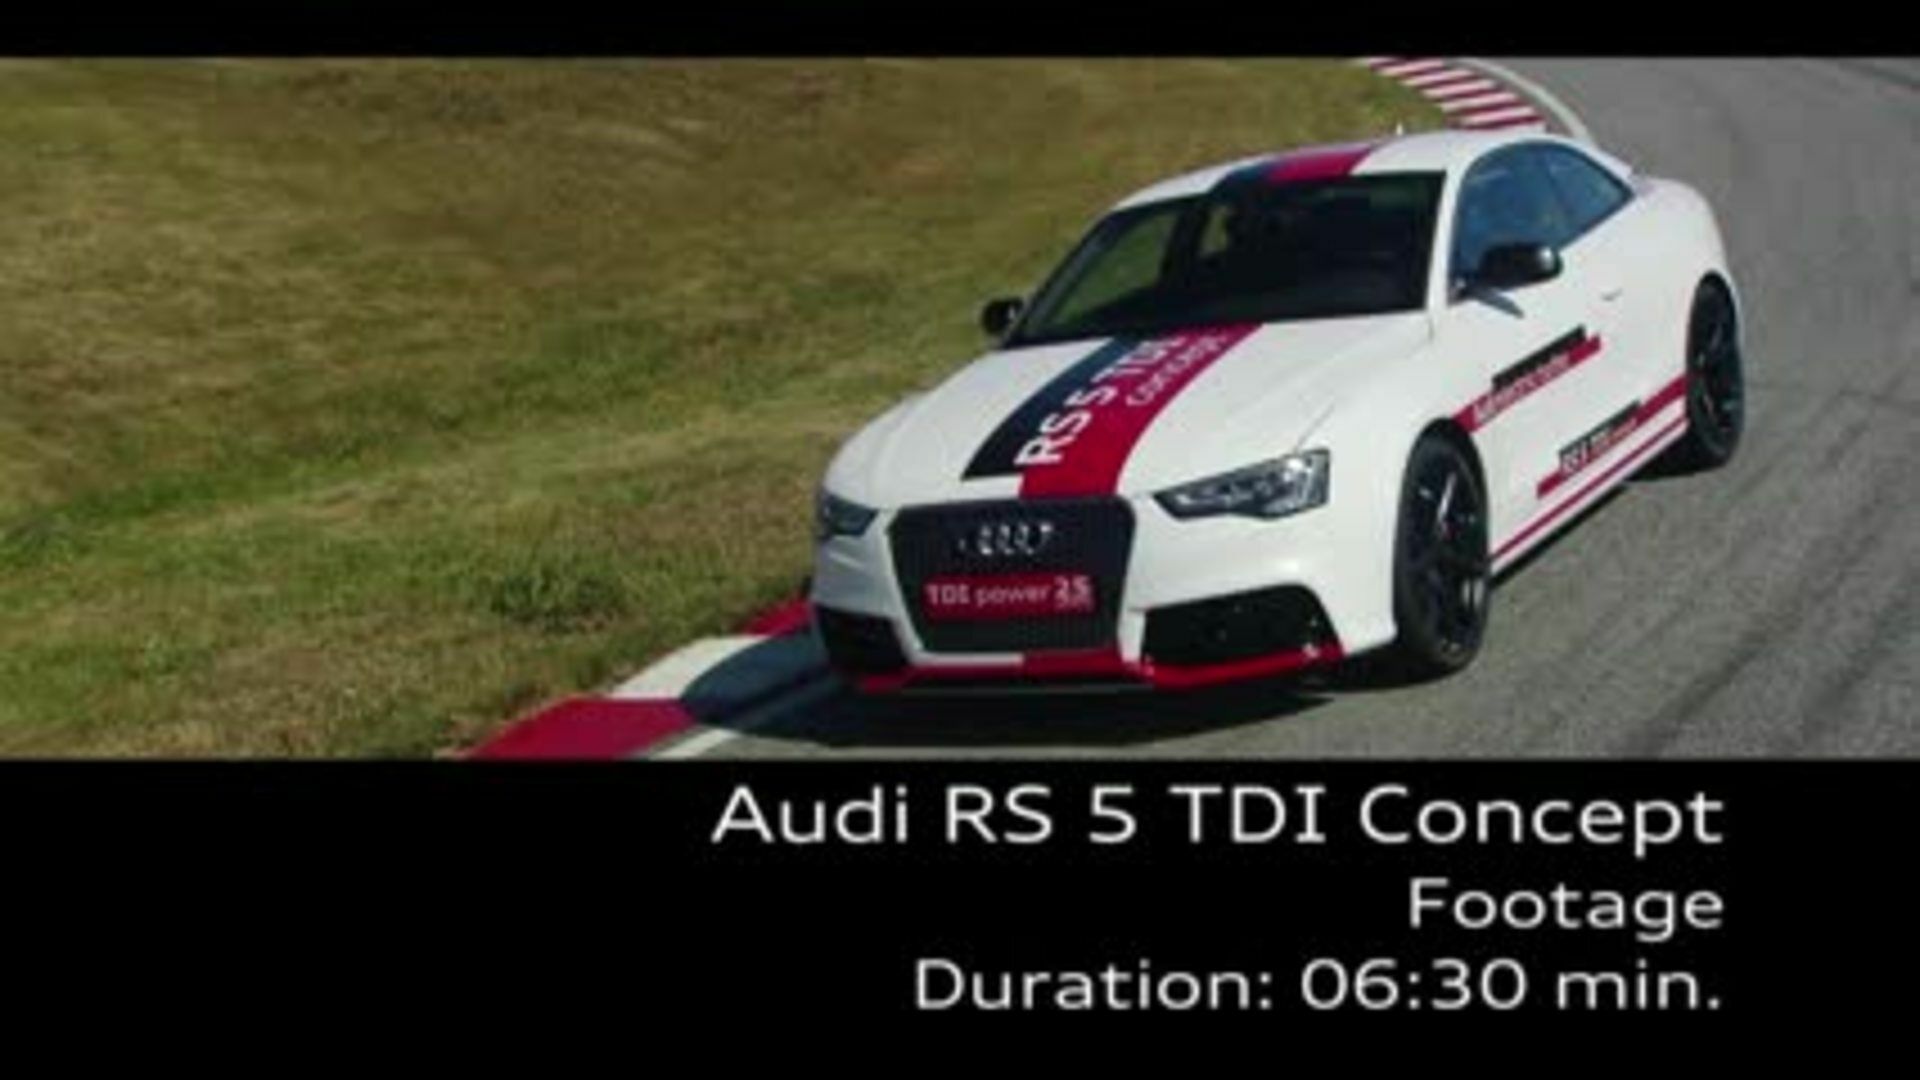 The Audi RS 5 TDI Concept